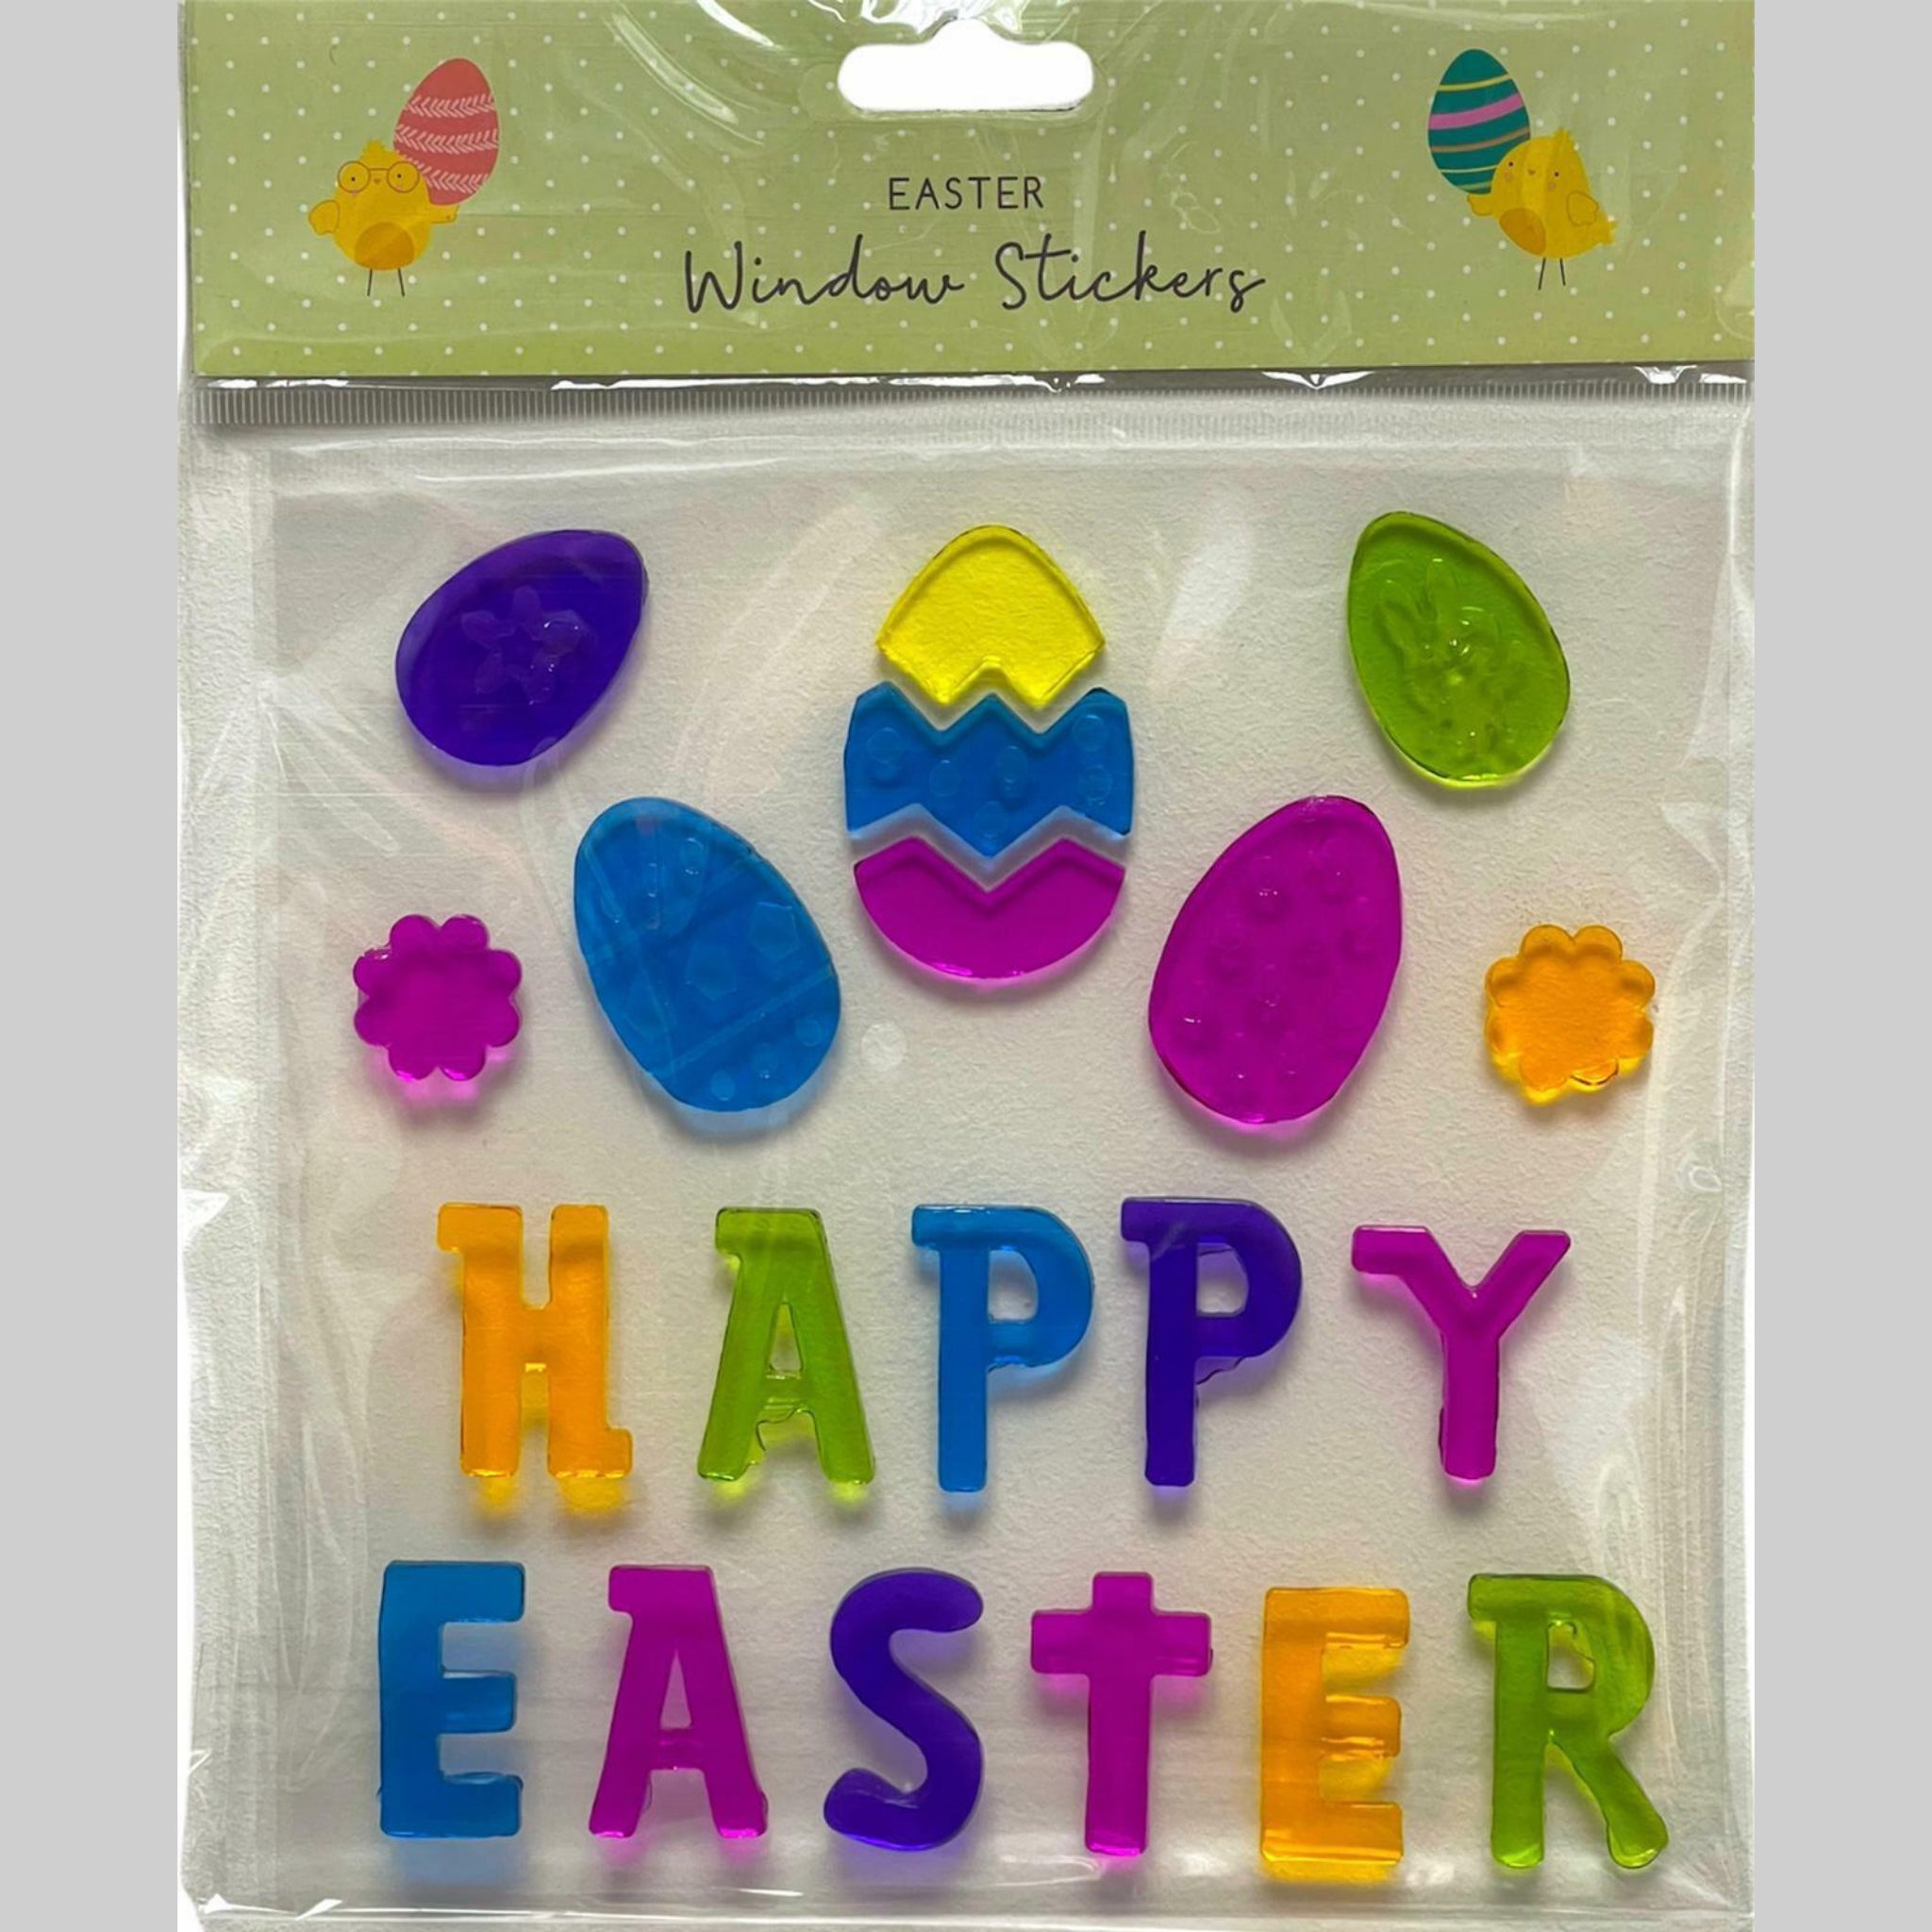 Beclen Harp Luxury Happy Easter Cute Bunny/Chick/Egg Window/Glass Door Peel And Stick/Gel/Decal Party Stickers-Perfect Decoration For Easter